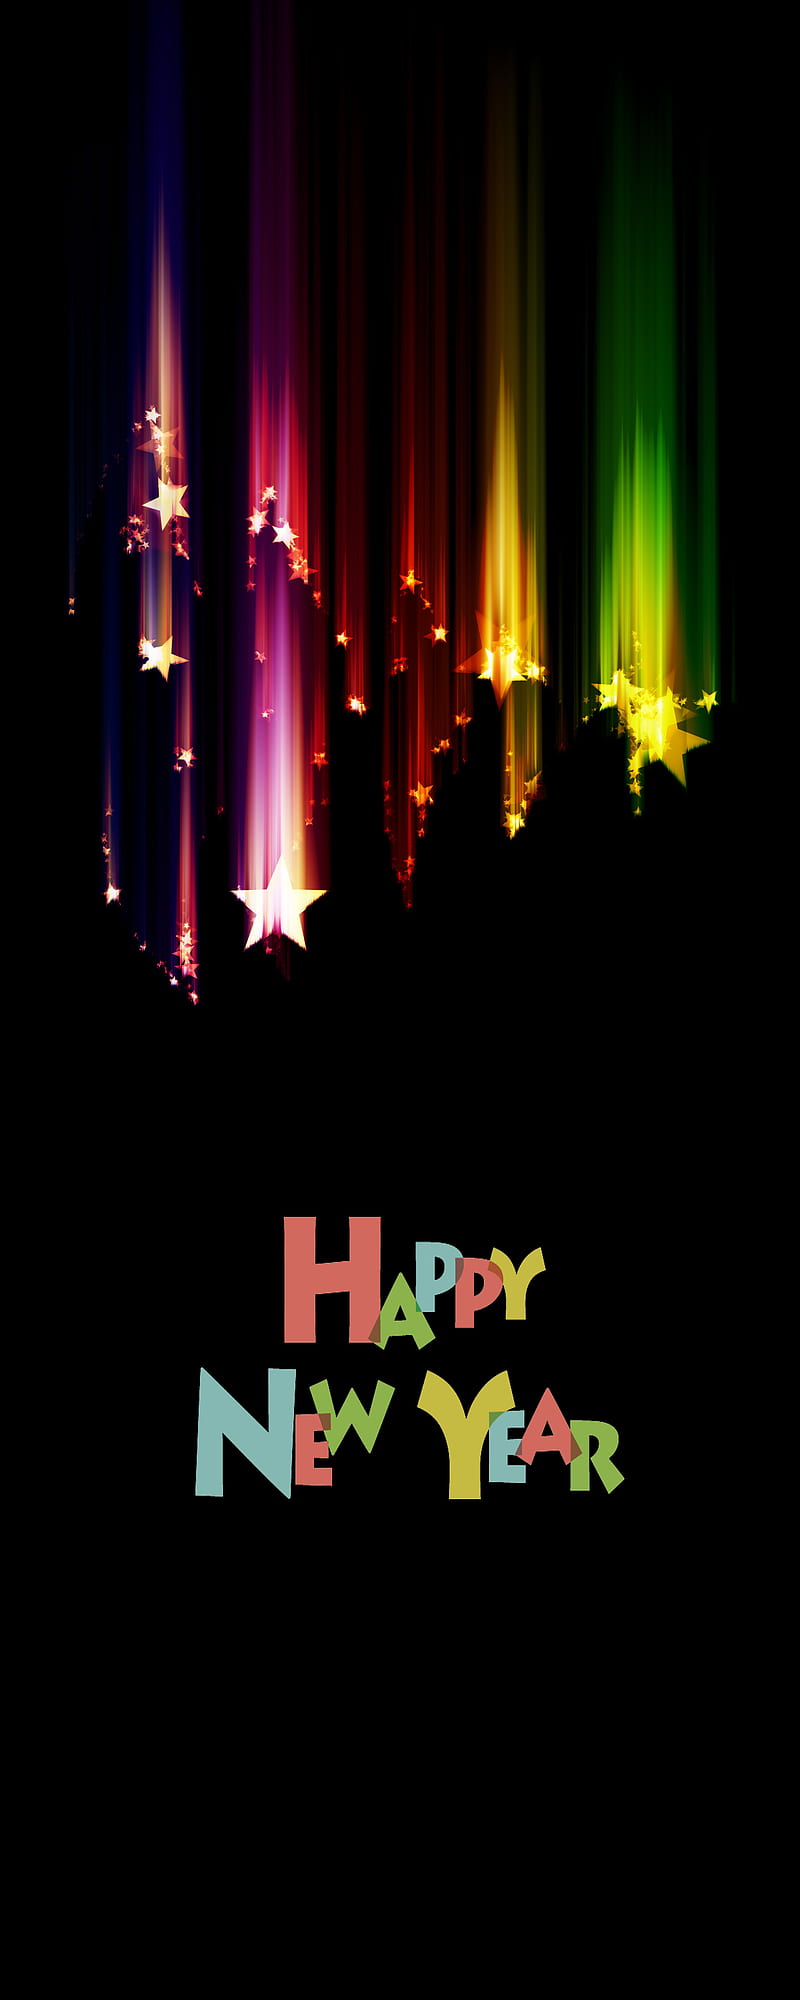 Happy New Year 2022 Yellow Hd Wallpaper For Laptop And Tablet Free Download  : Wallpapers13.com